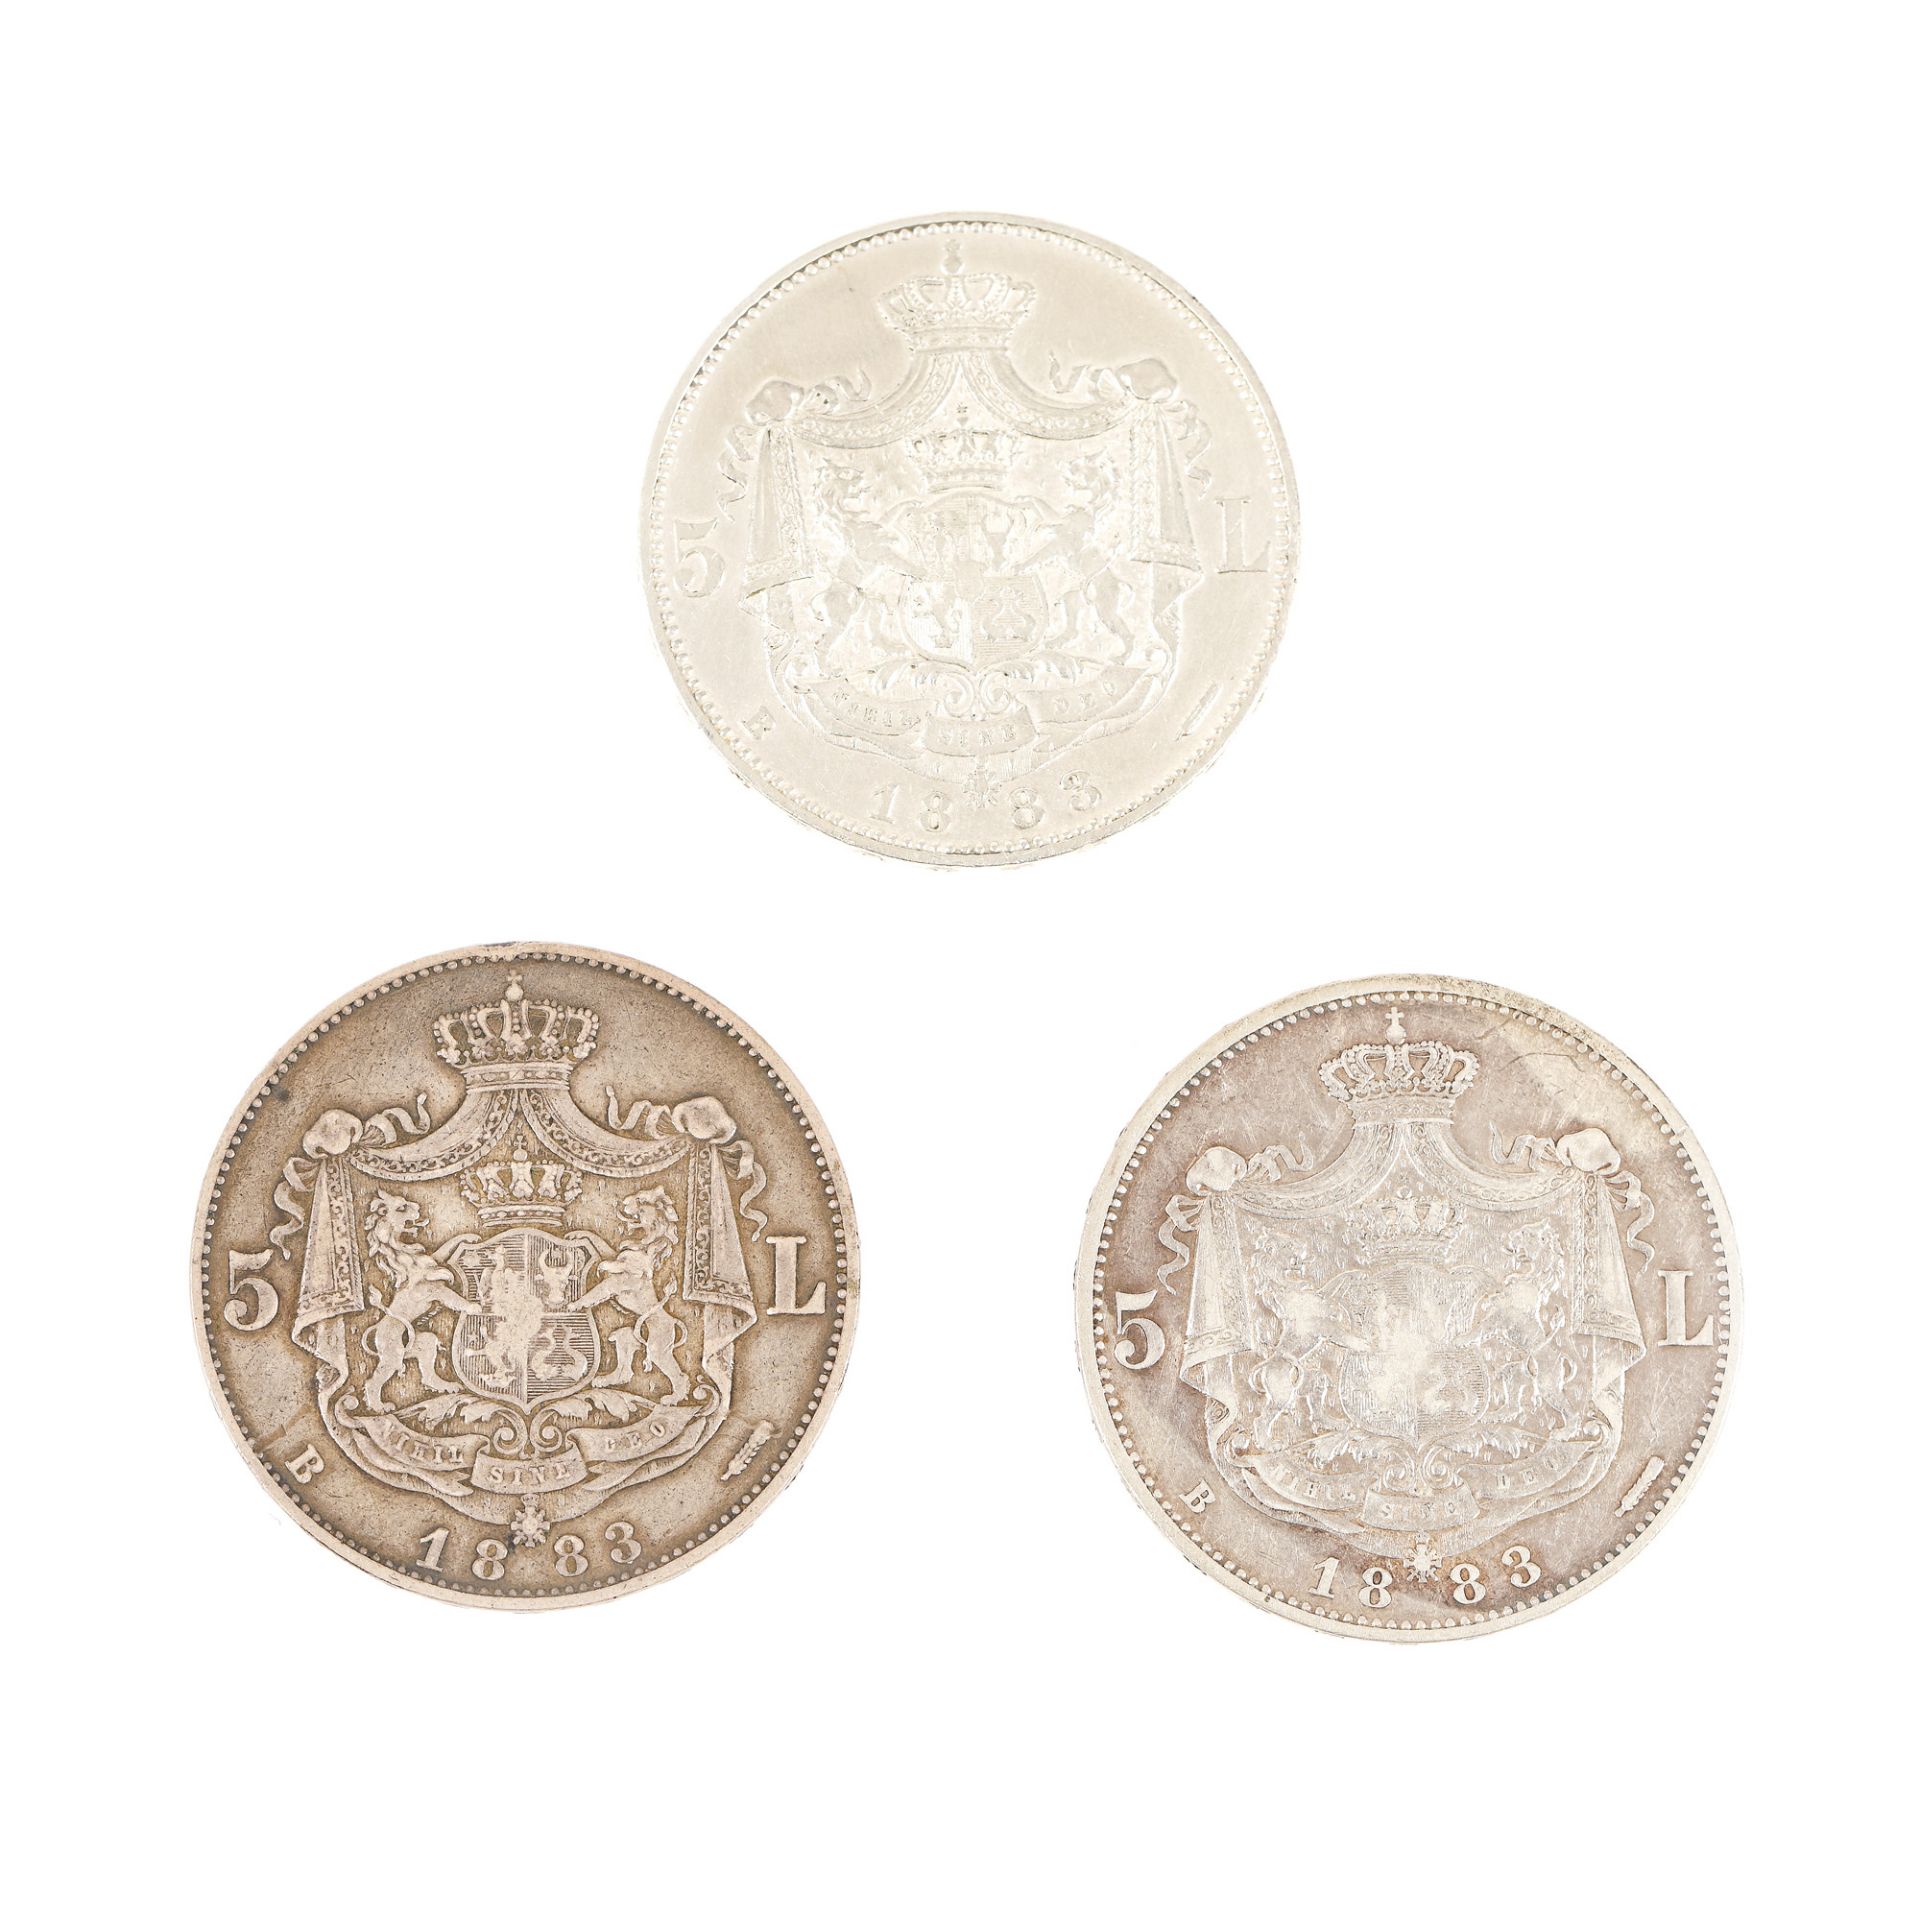 Lot consisting of three versions of the 5 Lei 1883 coin, "Kullrich" 6mm, "Kullrich" 6.5 mm, deviated